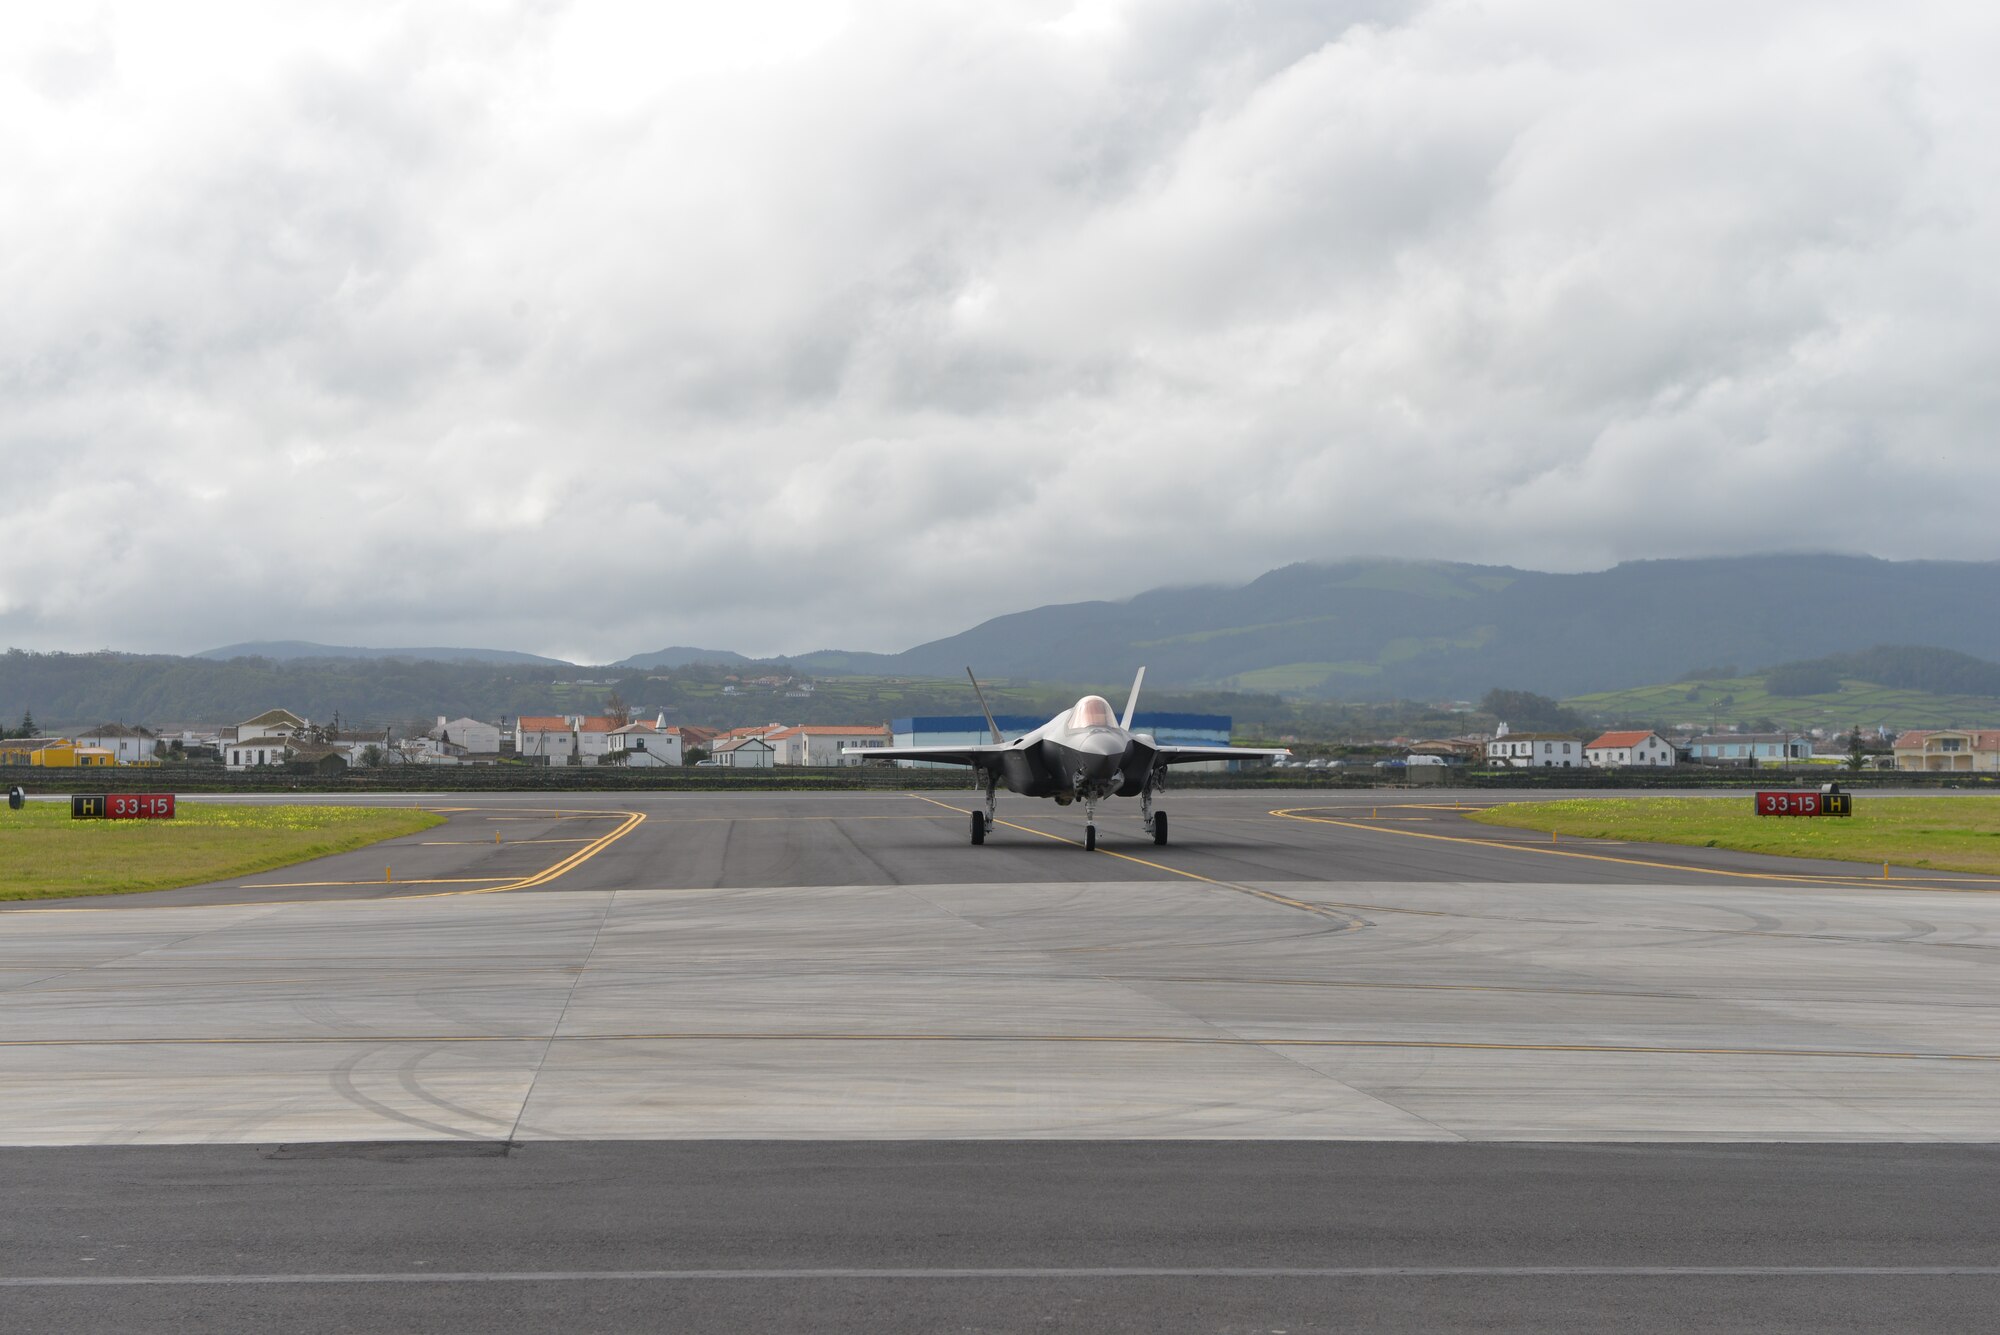 Air Force F-35A Lightning II lands at Lajes Field, Azores Portugal February 3, 2016. The Italian F-35A Lightning II refueled at Lajes Field on the first trans-Atlantic Ocean crossing from Cameri, Air Base Italy to Naval Air Station Patuxent River, Md., Feb 3-5. (U.S. Air Force photo by Ricky Baptista/Released) 